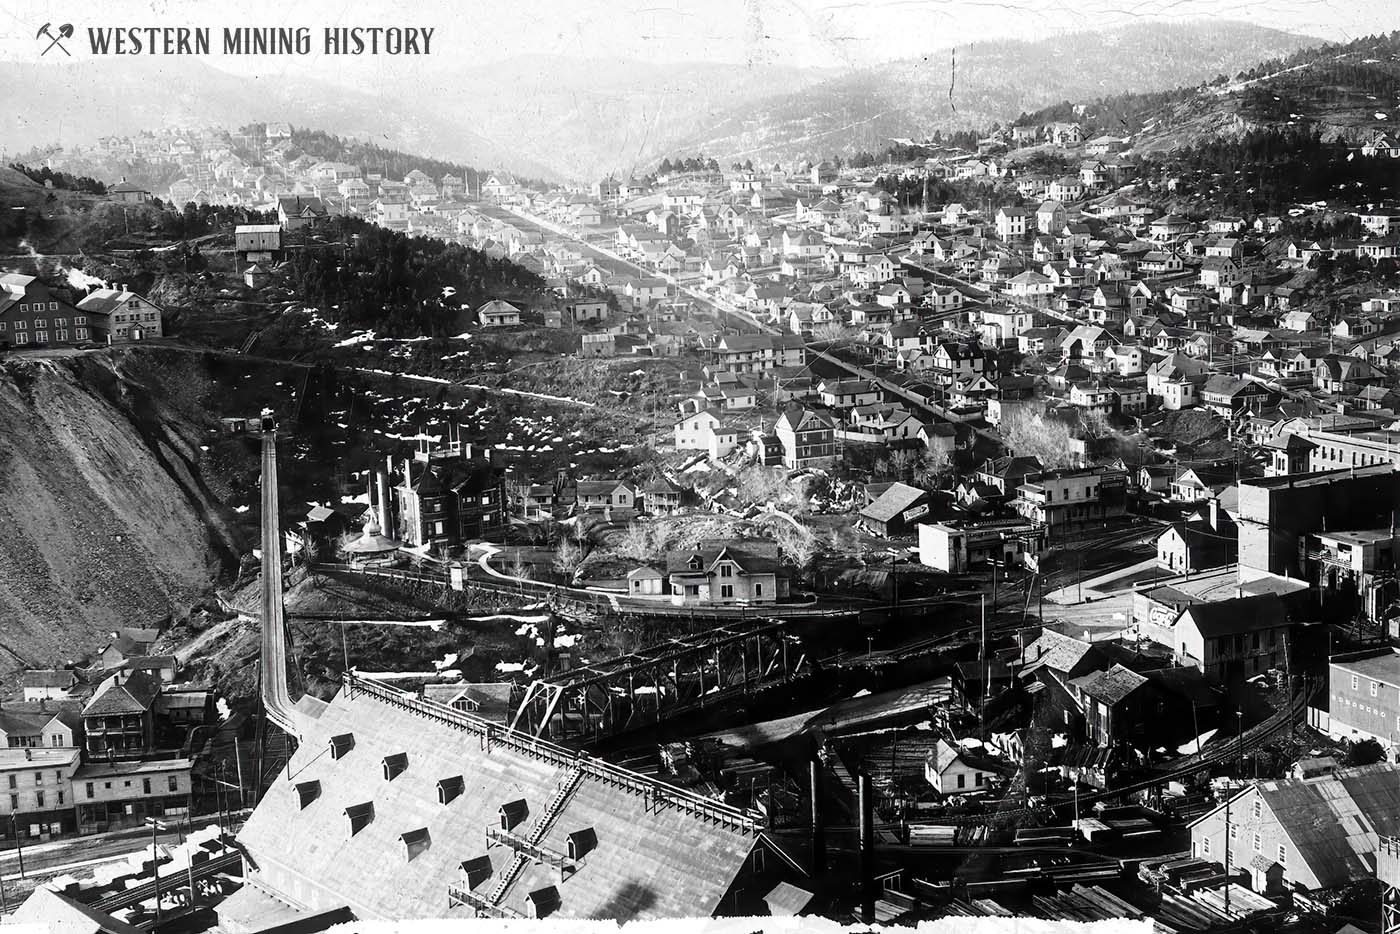 View of Lead, South Dakota from the Homestake Mine ca. 1910